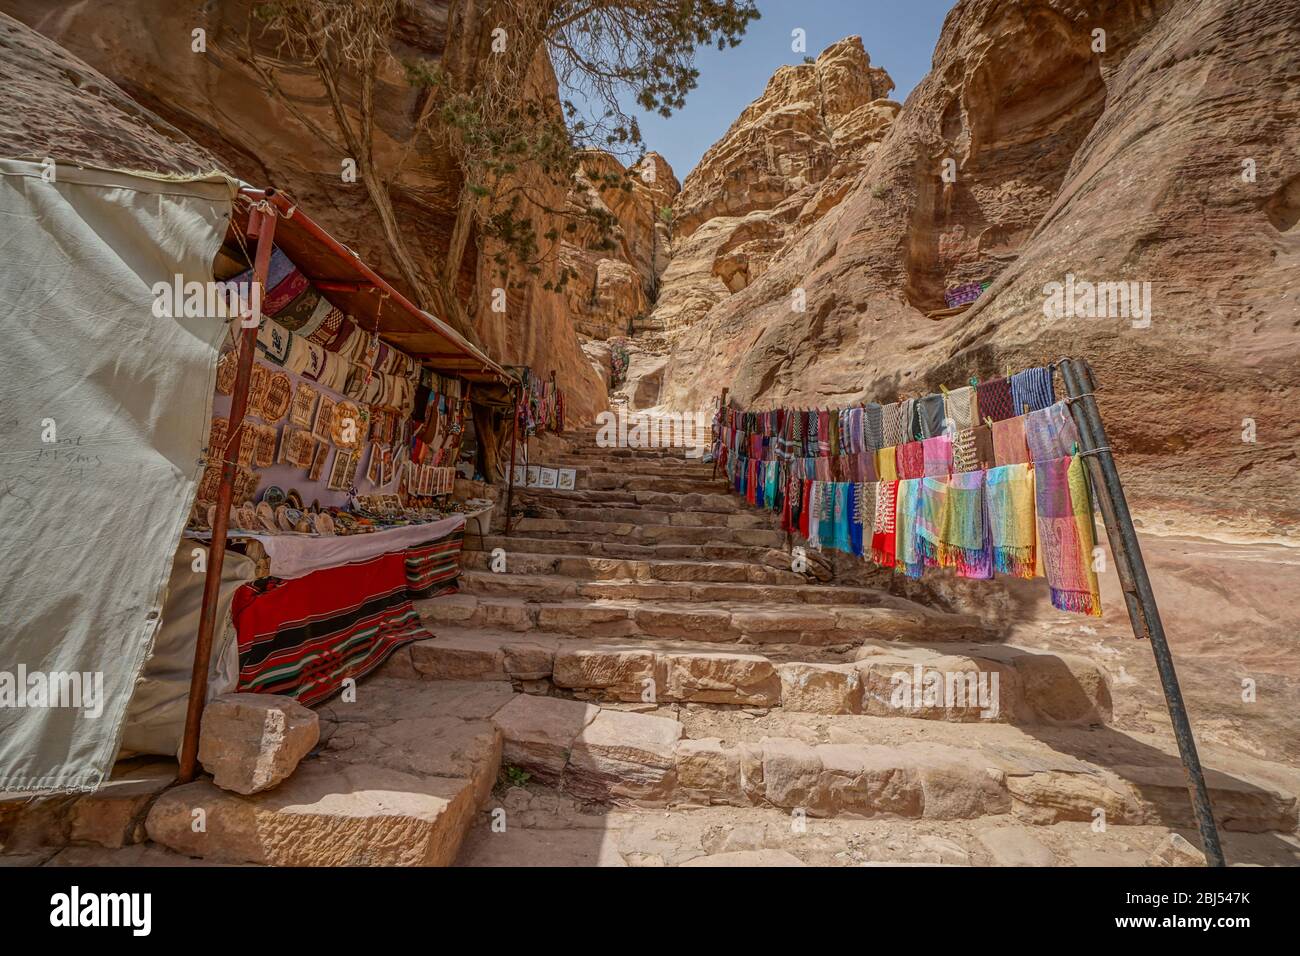 Passageways cut through the mountainous canyons of Petra in Jordan are lined with stands selling beautiful Bedouin crafts. Stock Photo